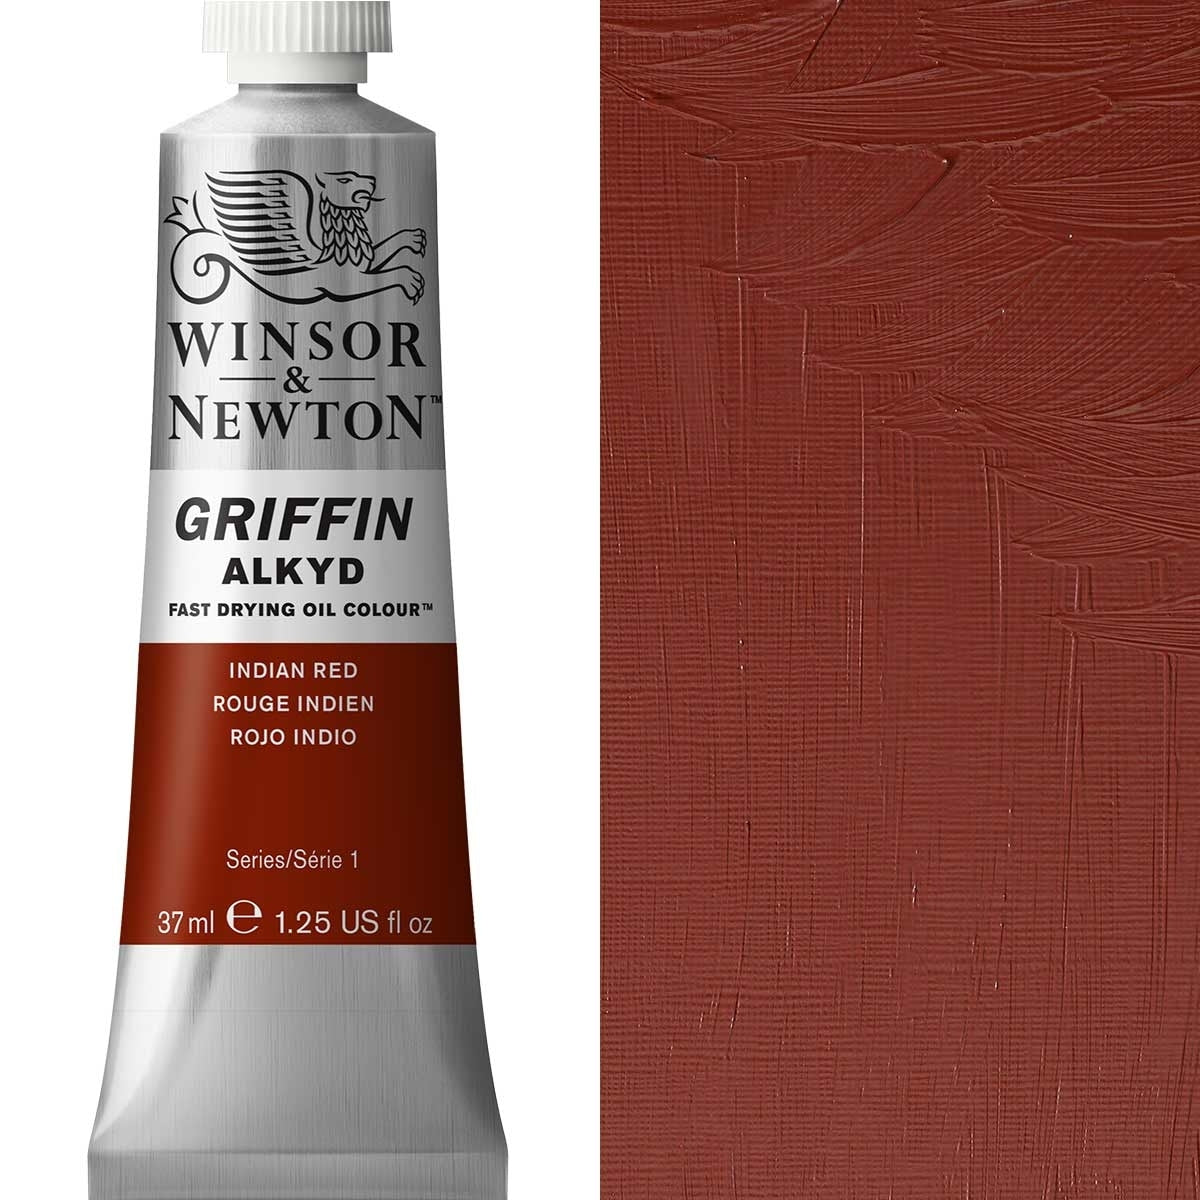 Winsor and Newton - Griffin ALKYD Oil Colour - 37ml - Indian Red